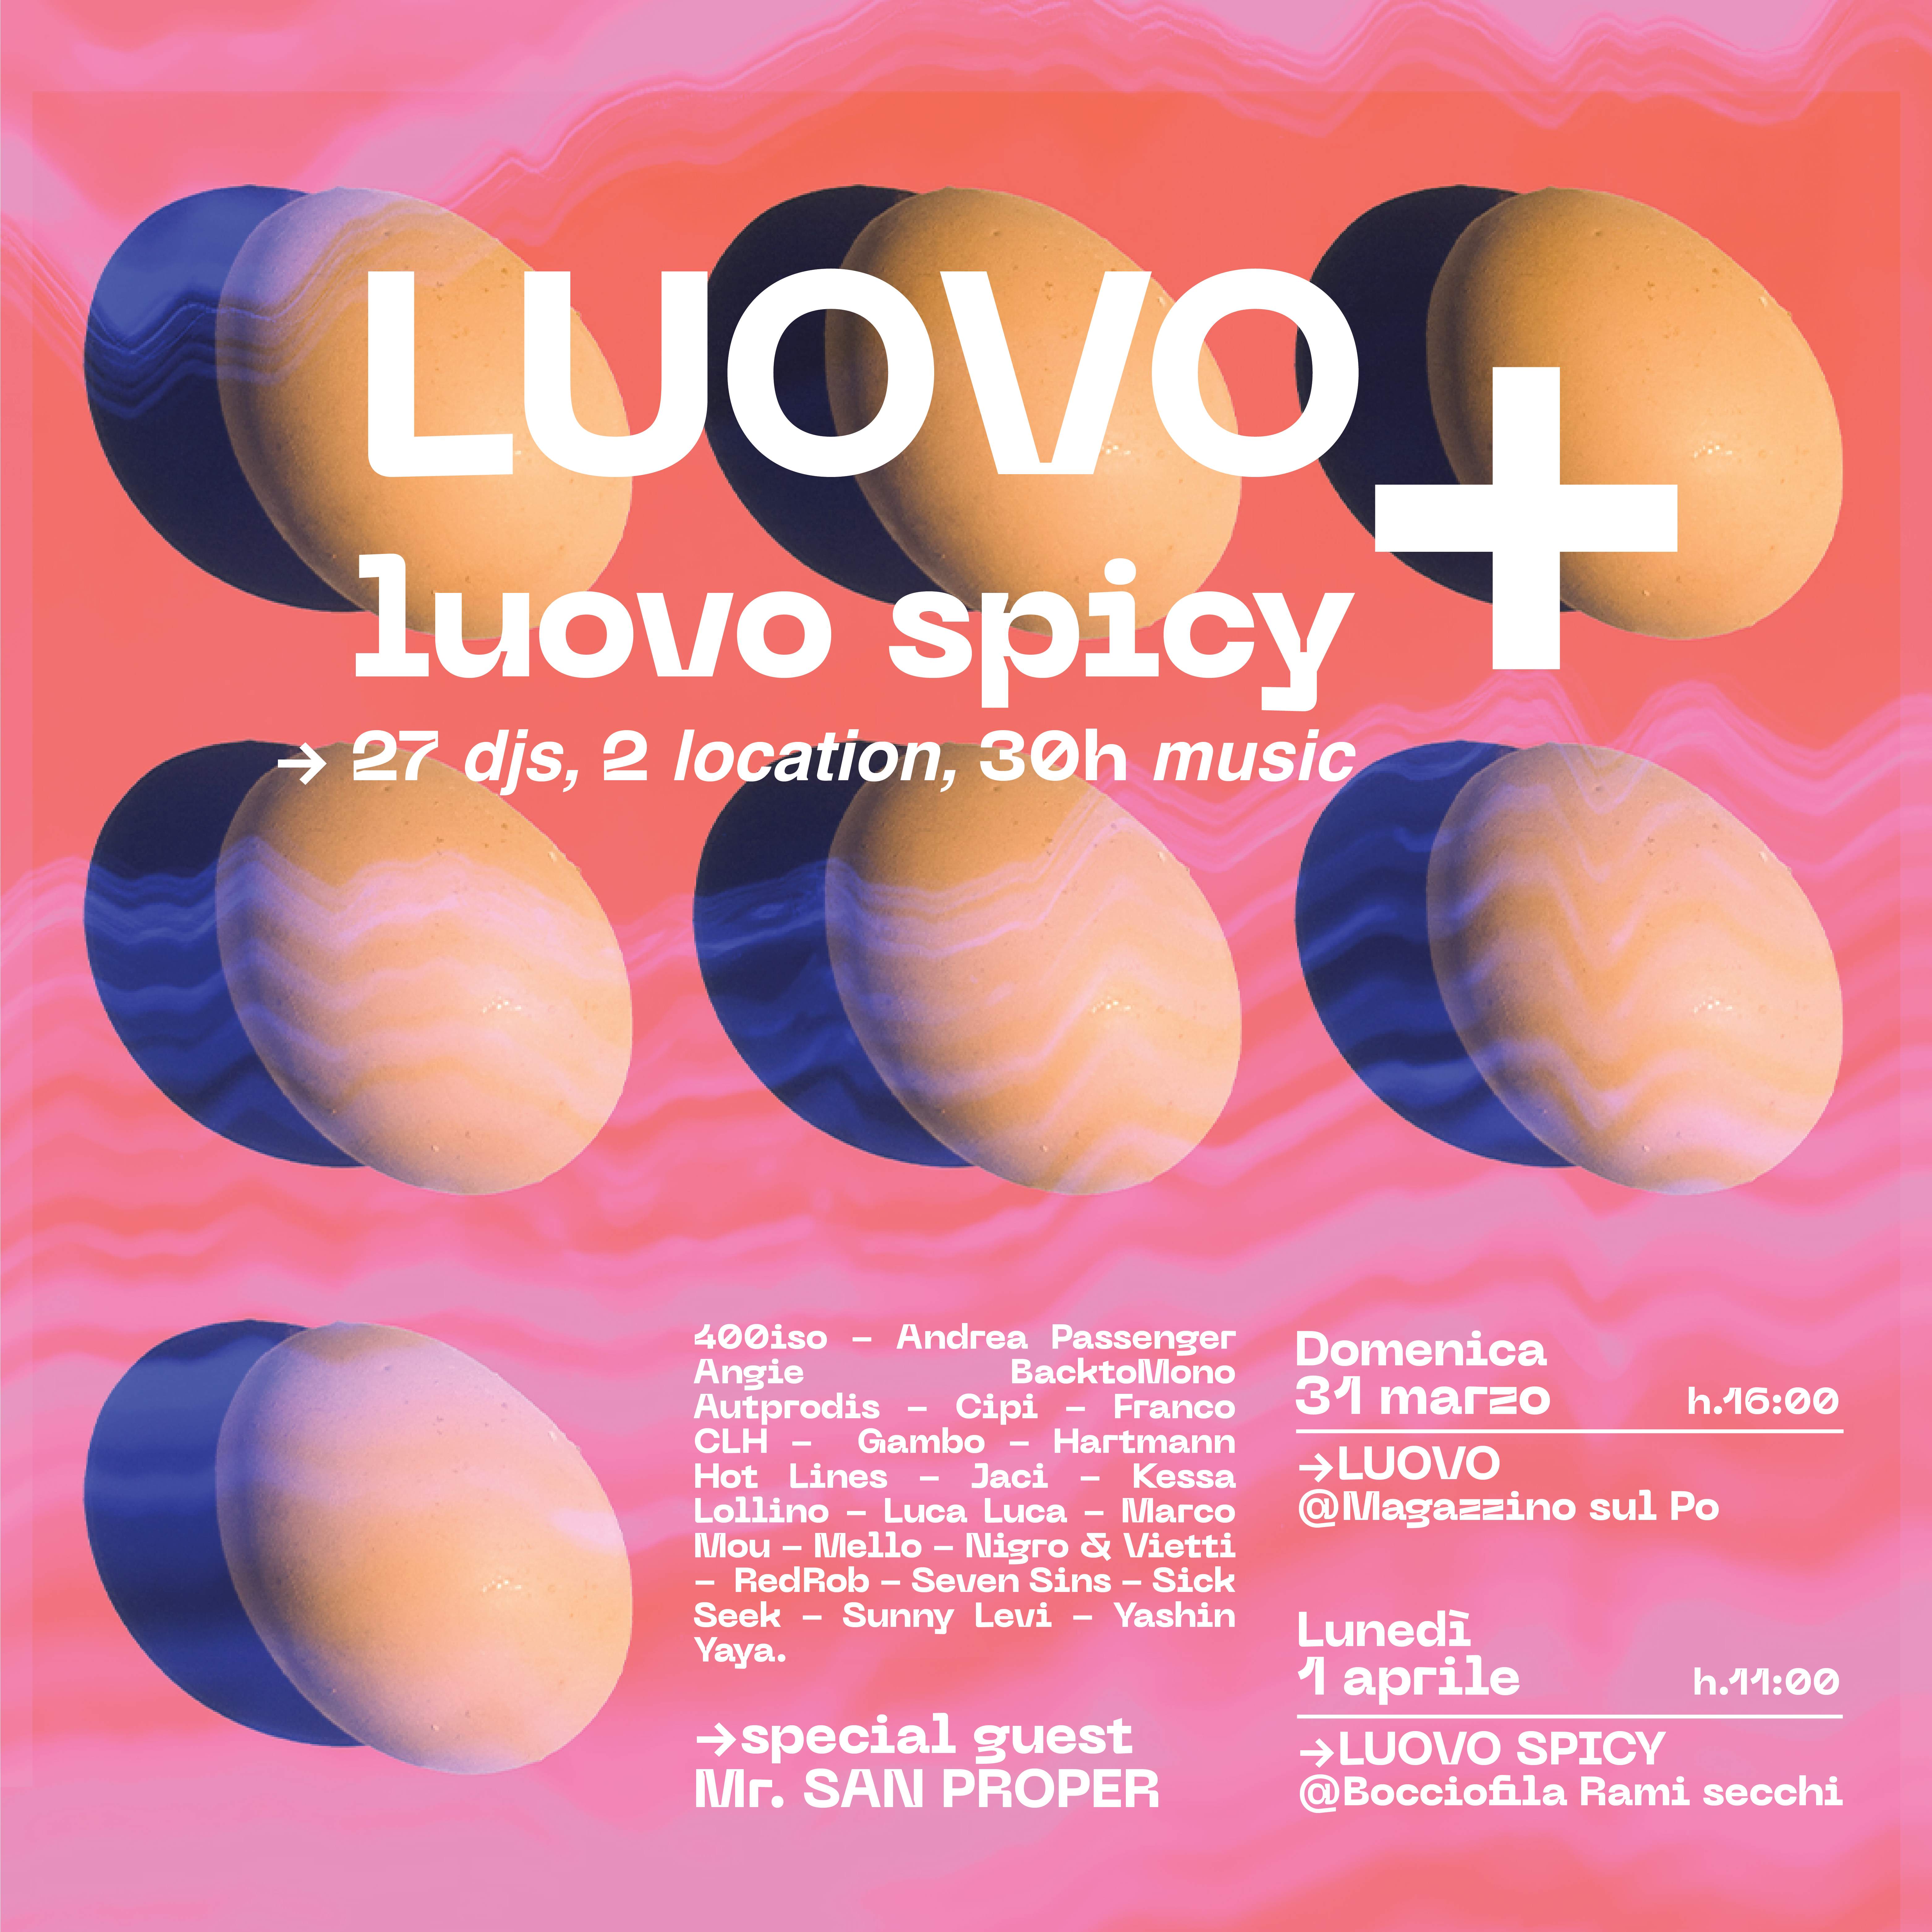 LUOVO + LUOVOSpicy - フライヤー表